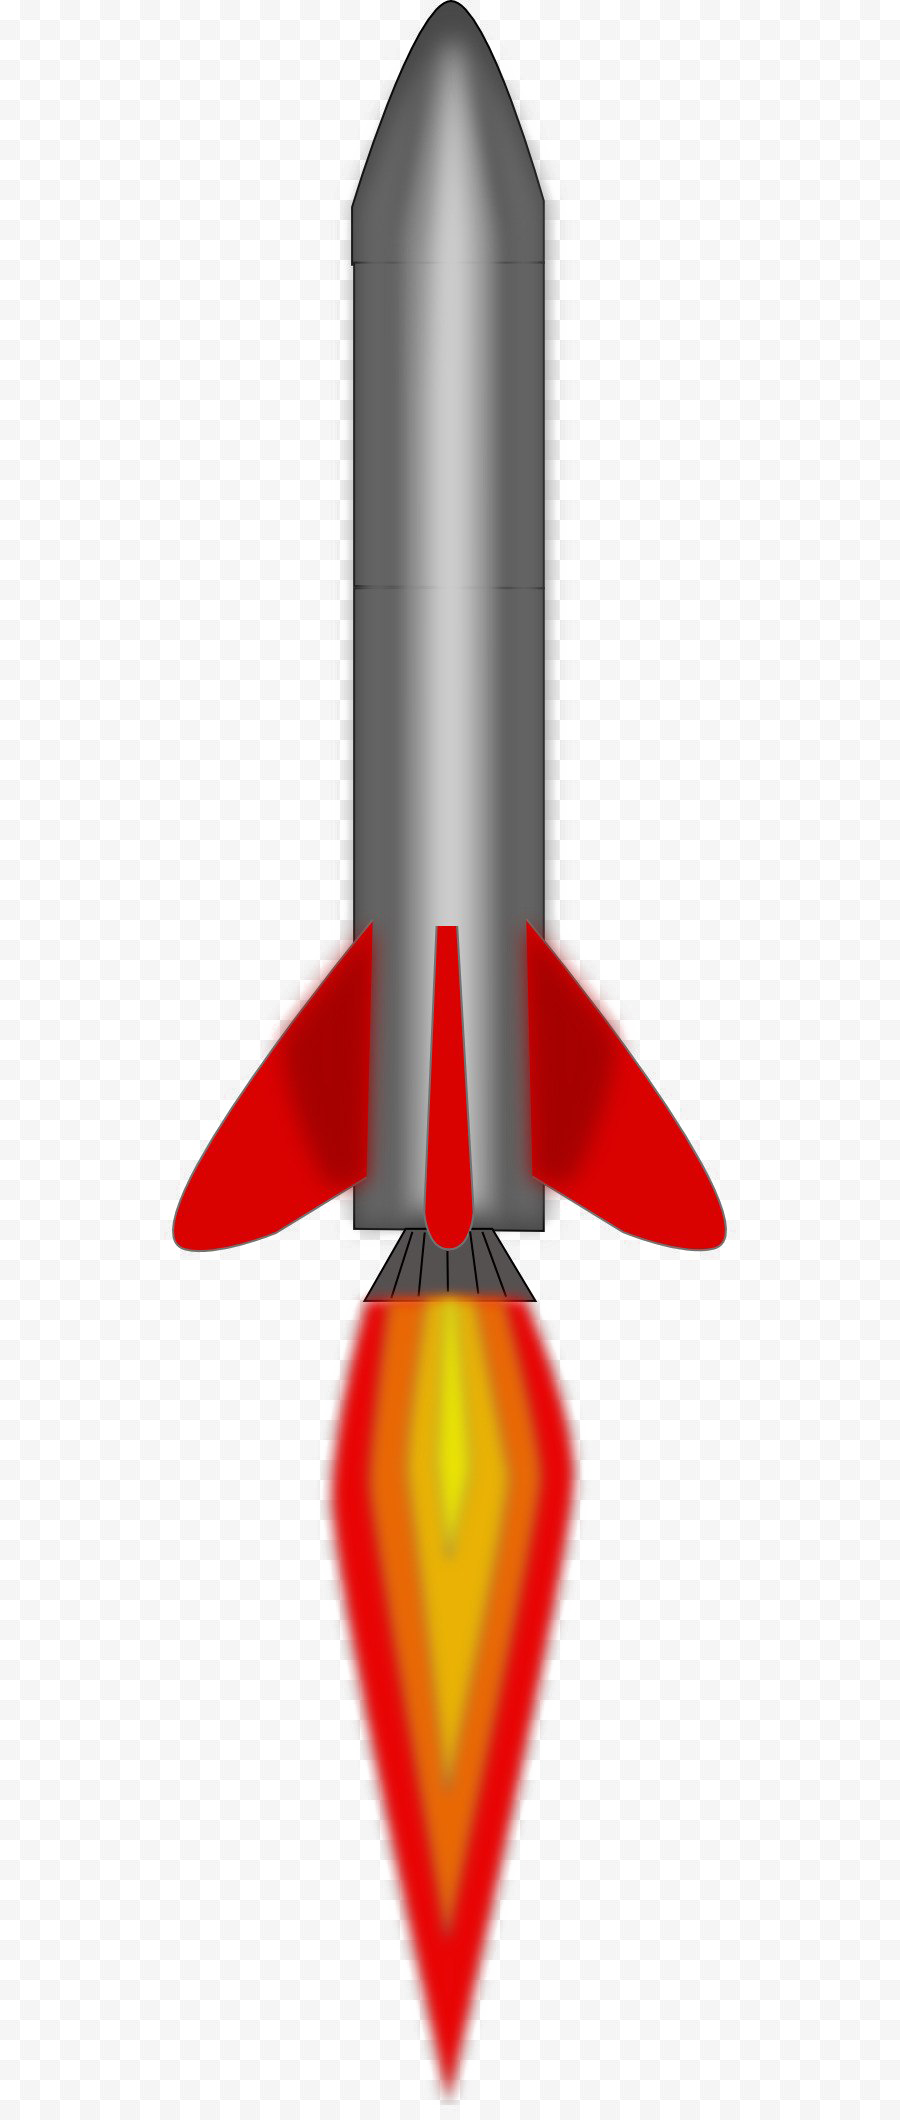 Nuclear Missile PNG Image With Transparent Background